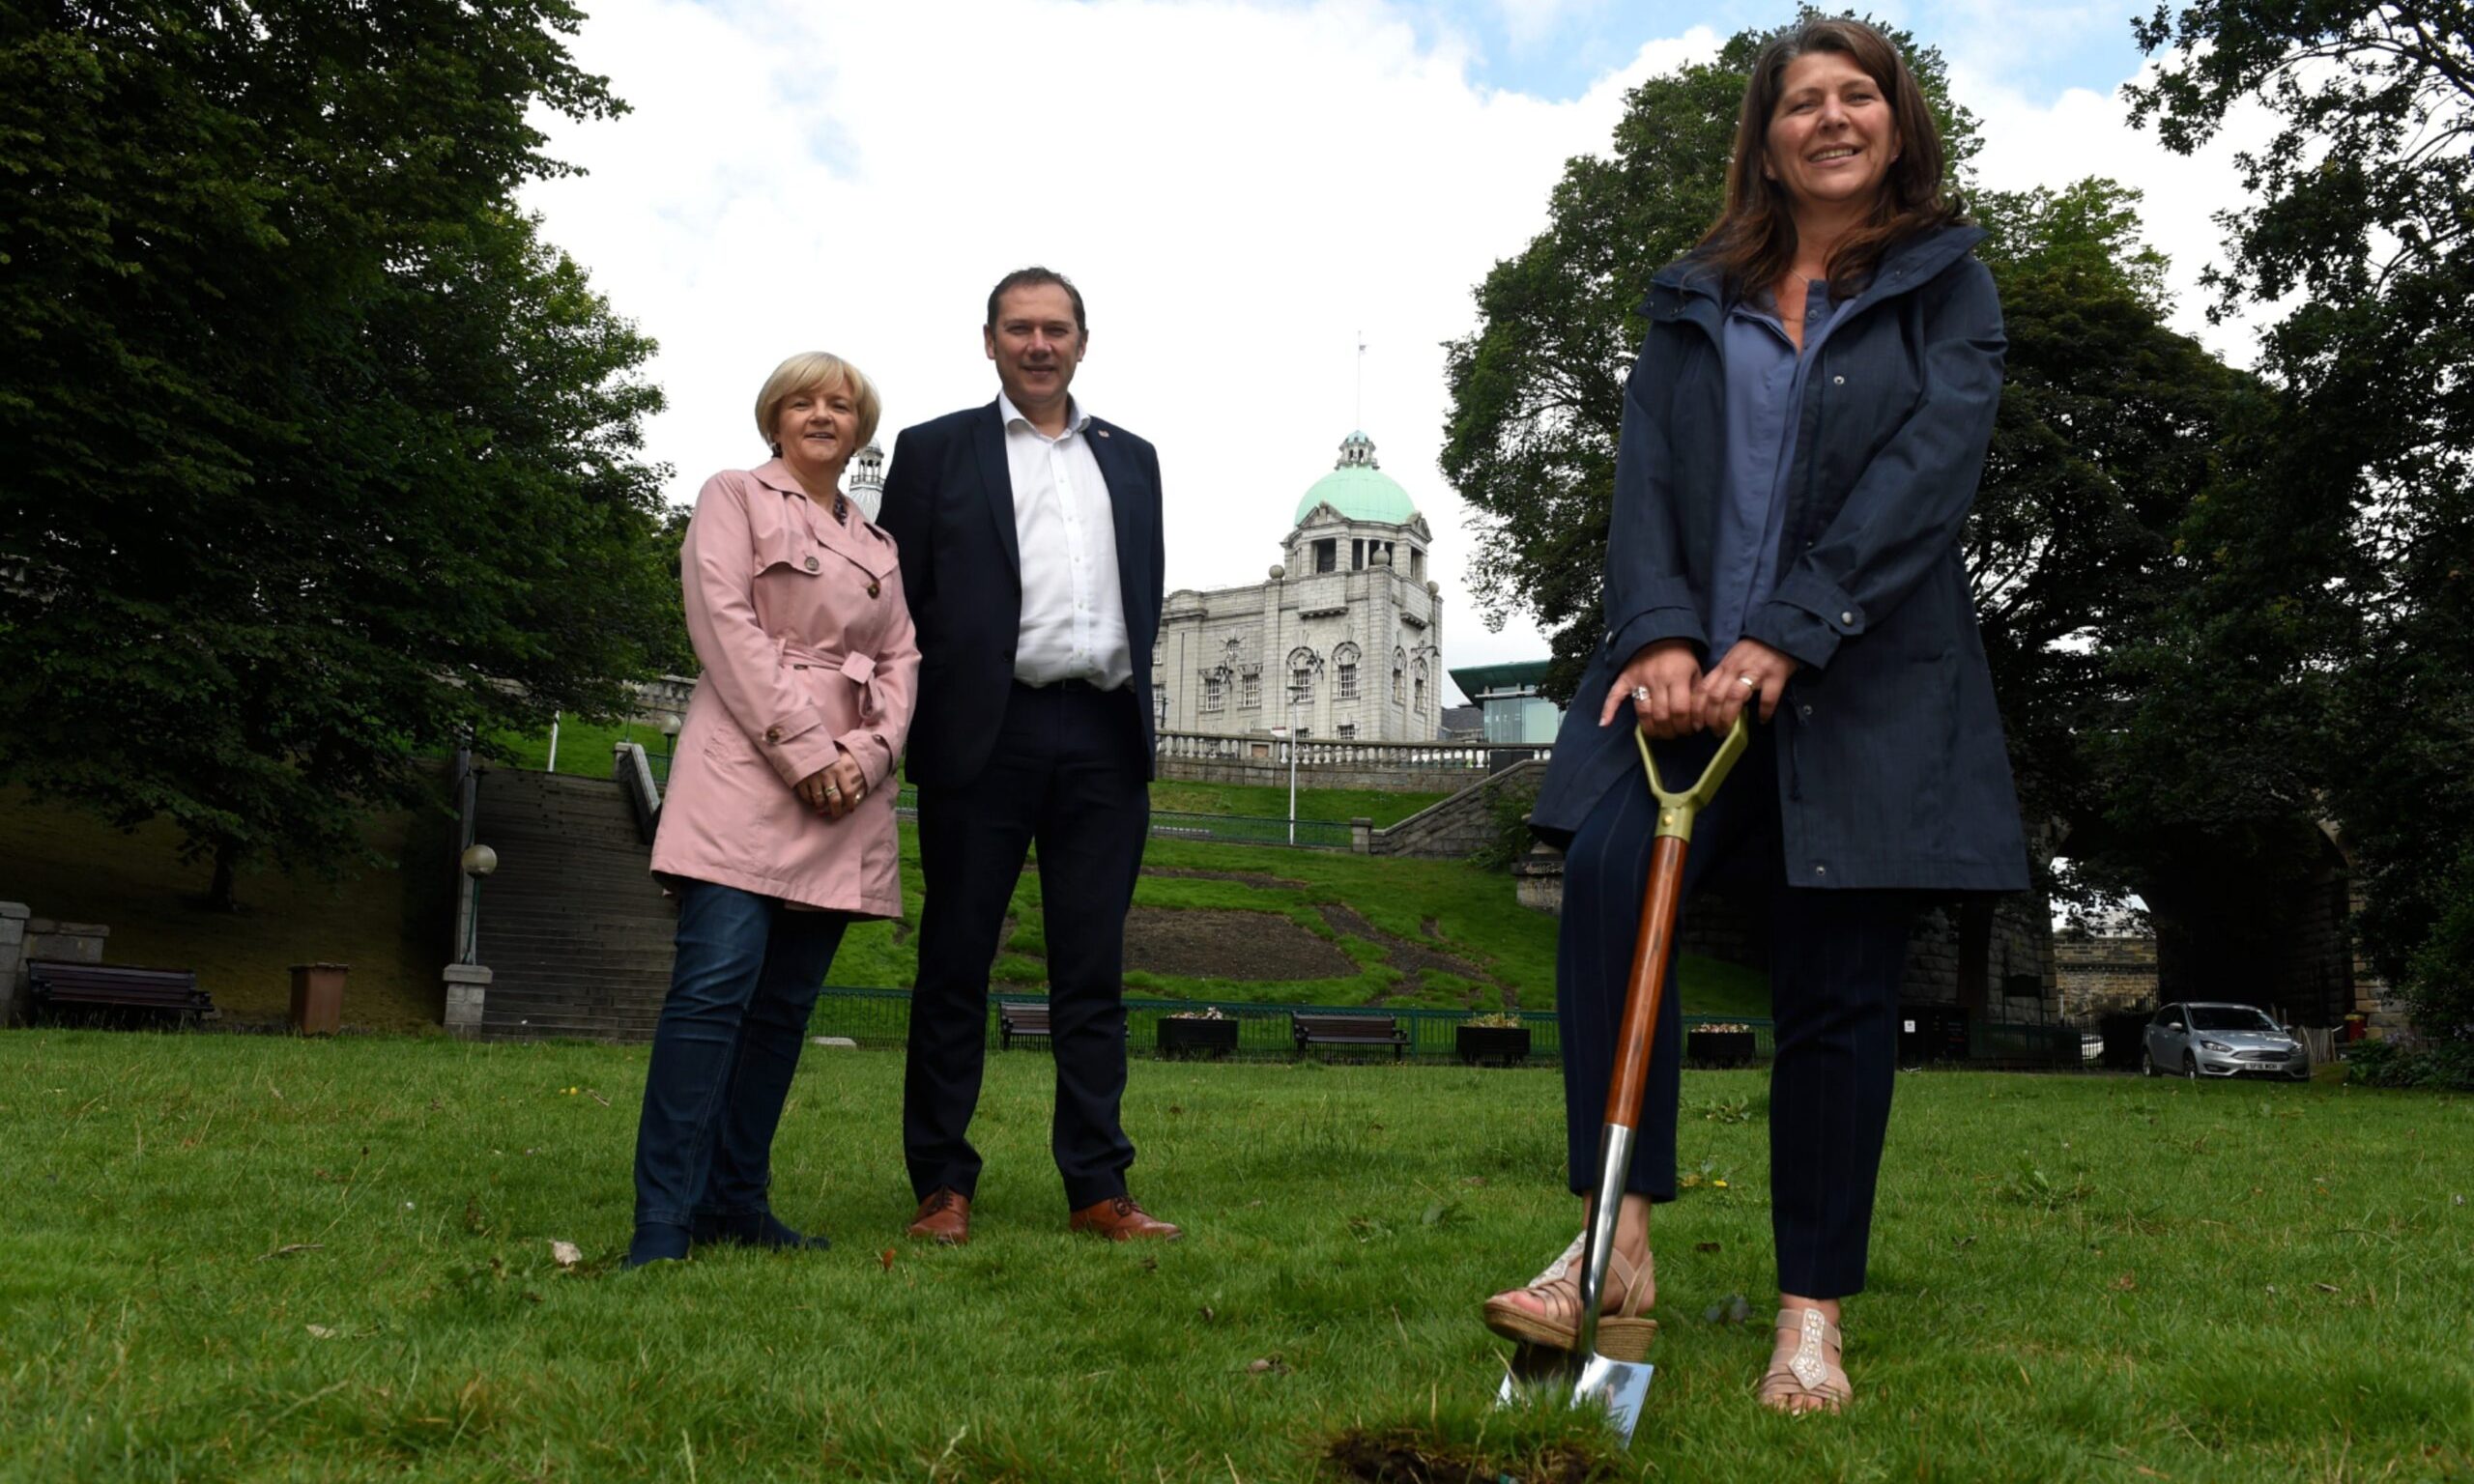 The council administration leaders - Jenny Laing, Douglas Lumsden and Marie Boulton - cut the turf in August 2019 as work on the Union Terrace Gardens revamp begins.